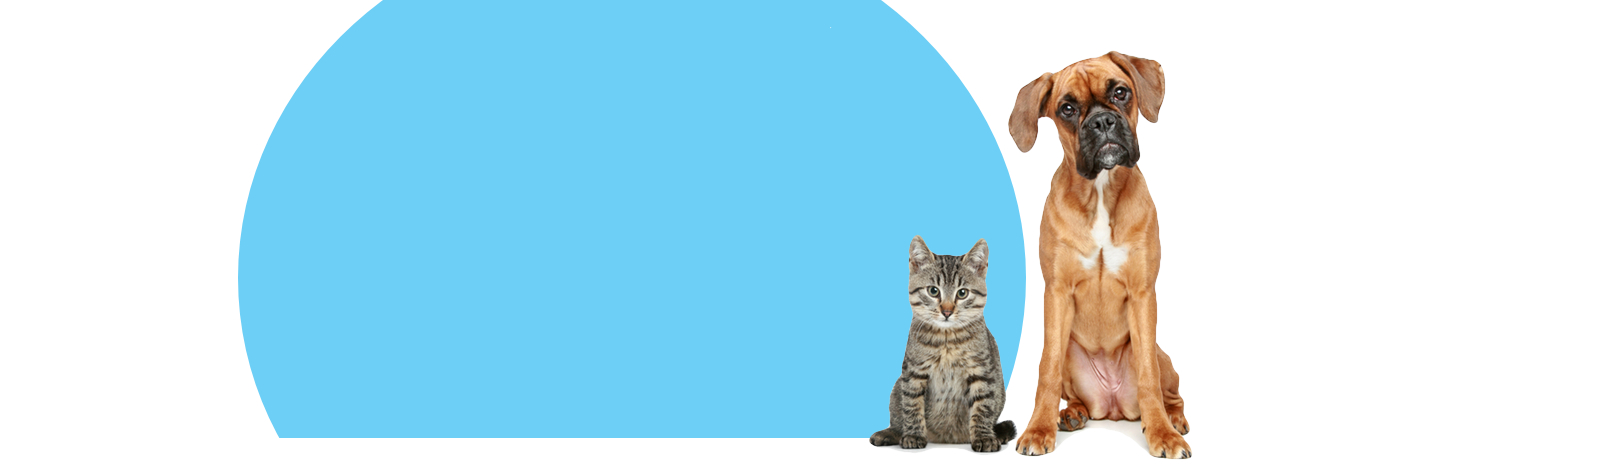 dog and cat background